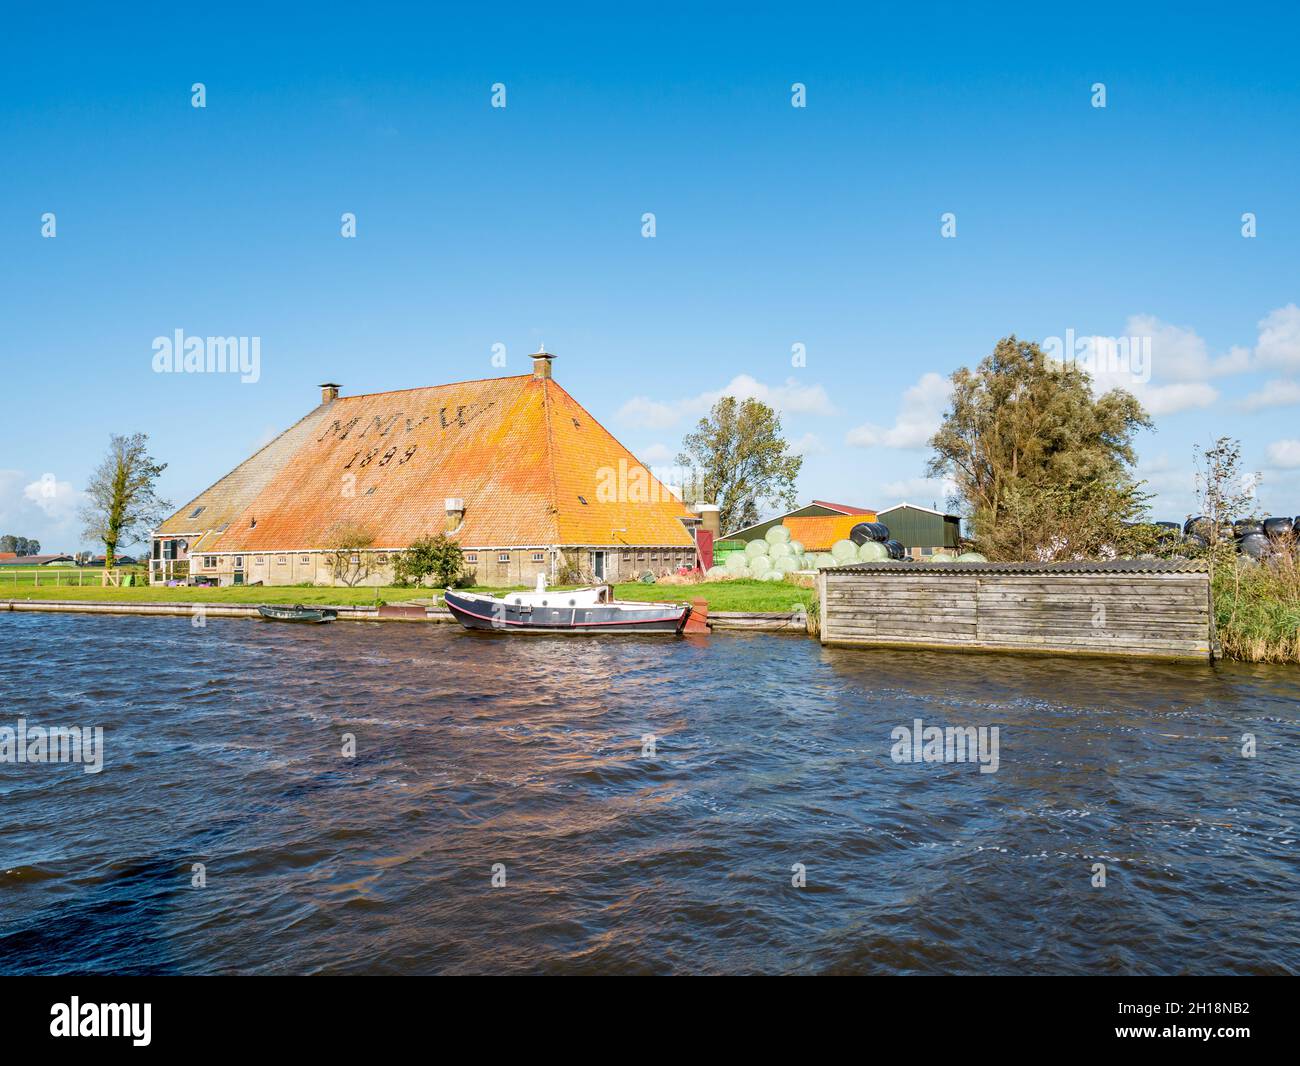 Traditional farmhouse with large roof along Koarte Fliet canal in Gaastmeer, Friesland, Netherlands Stock Photo